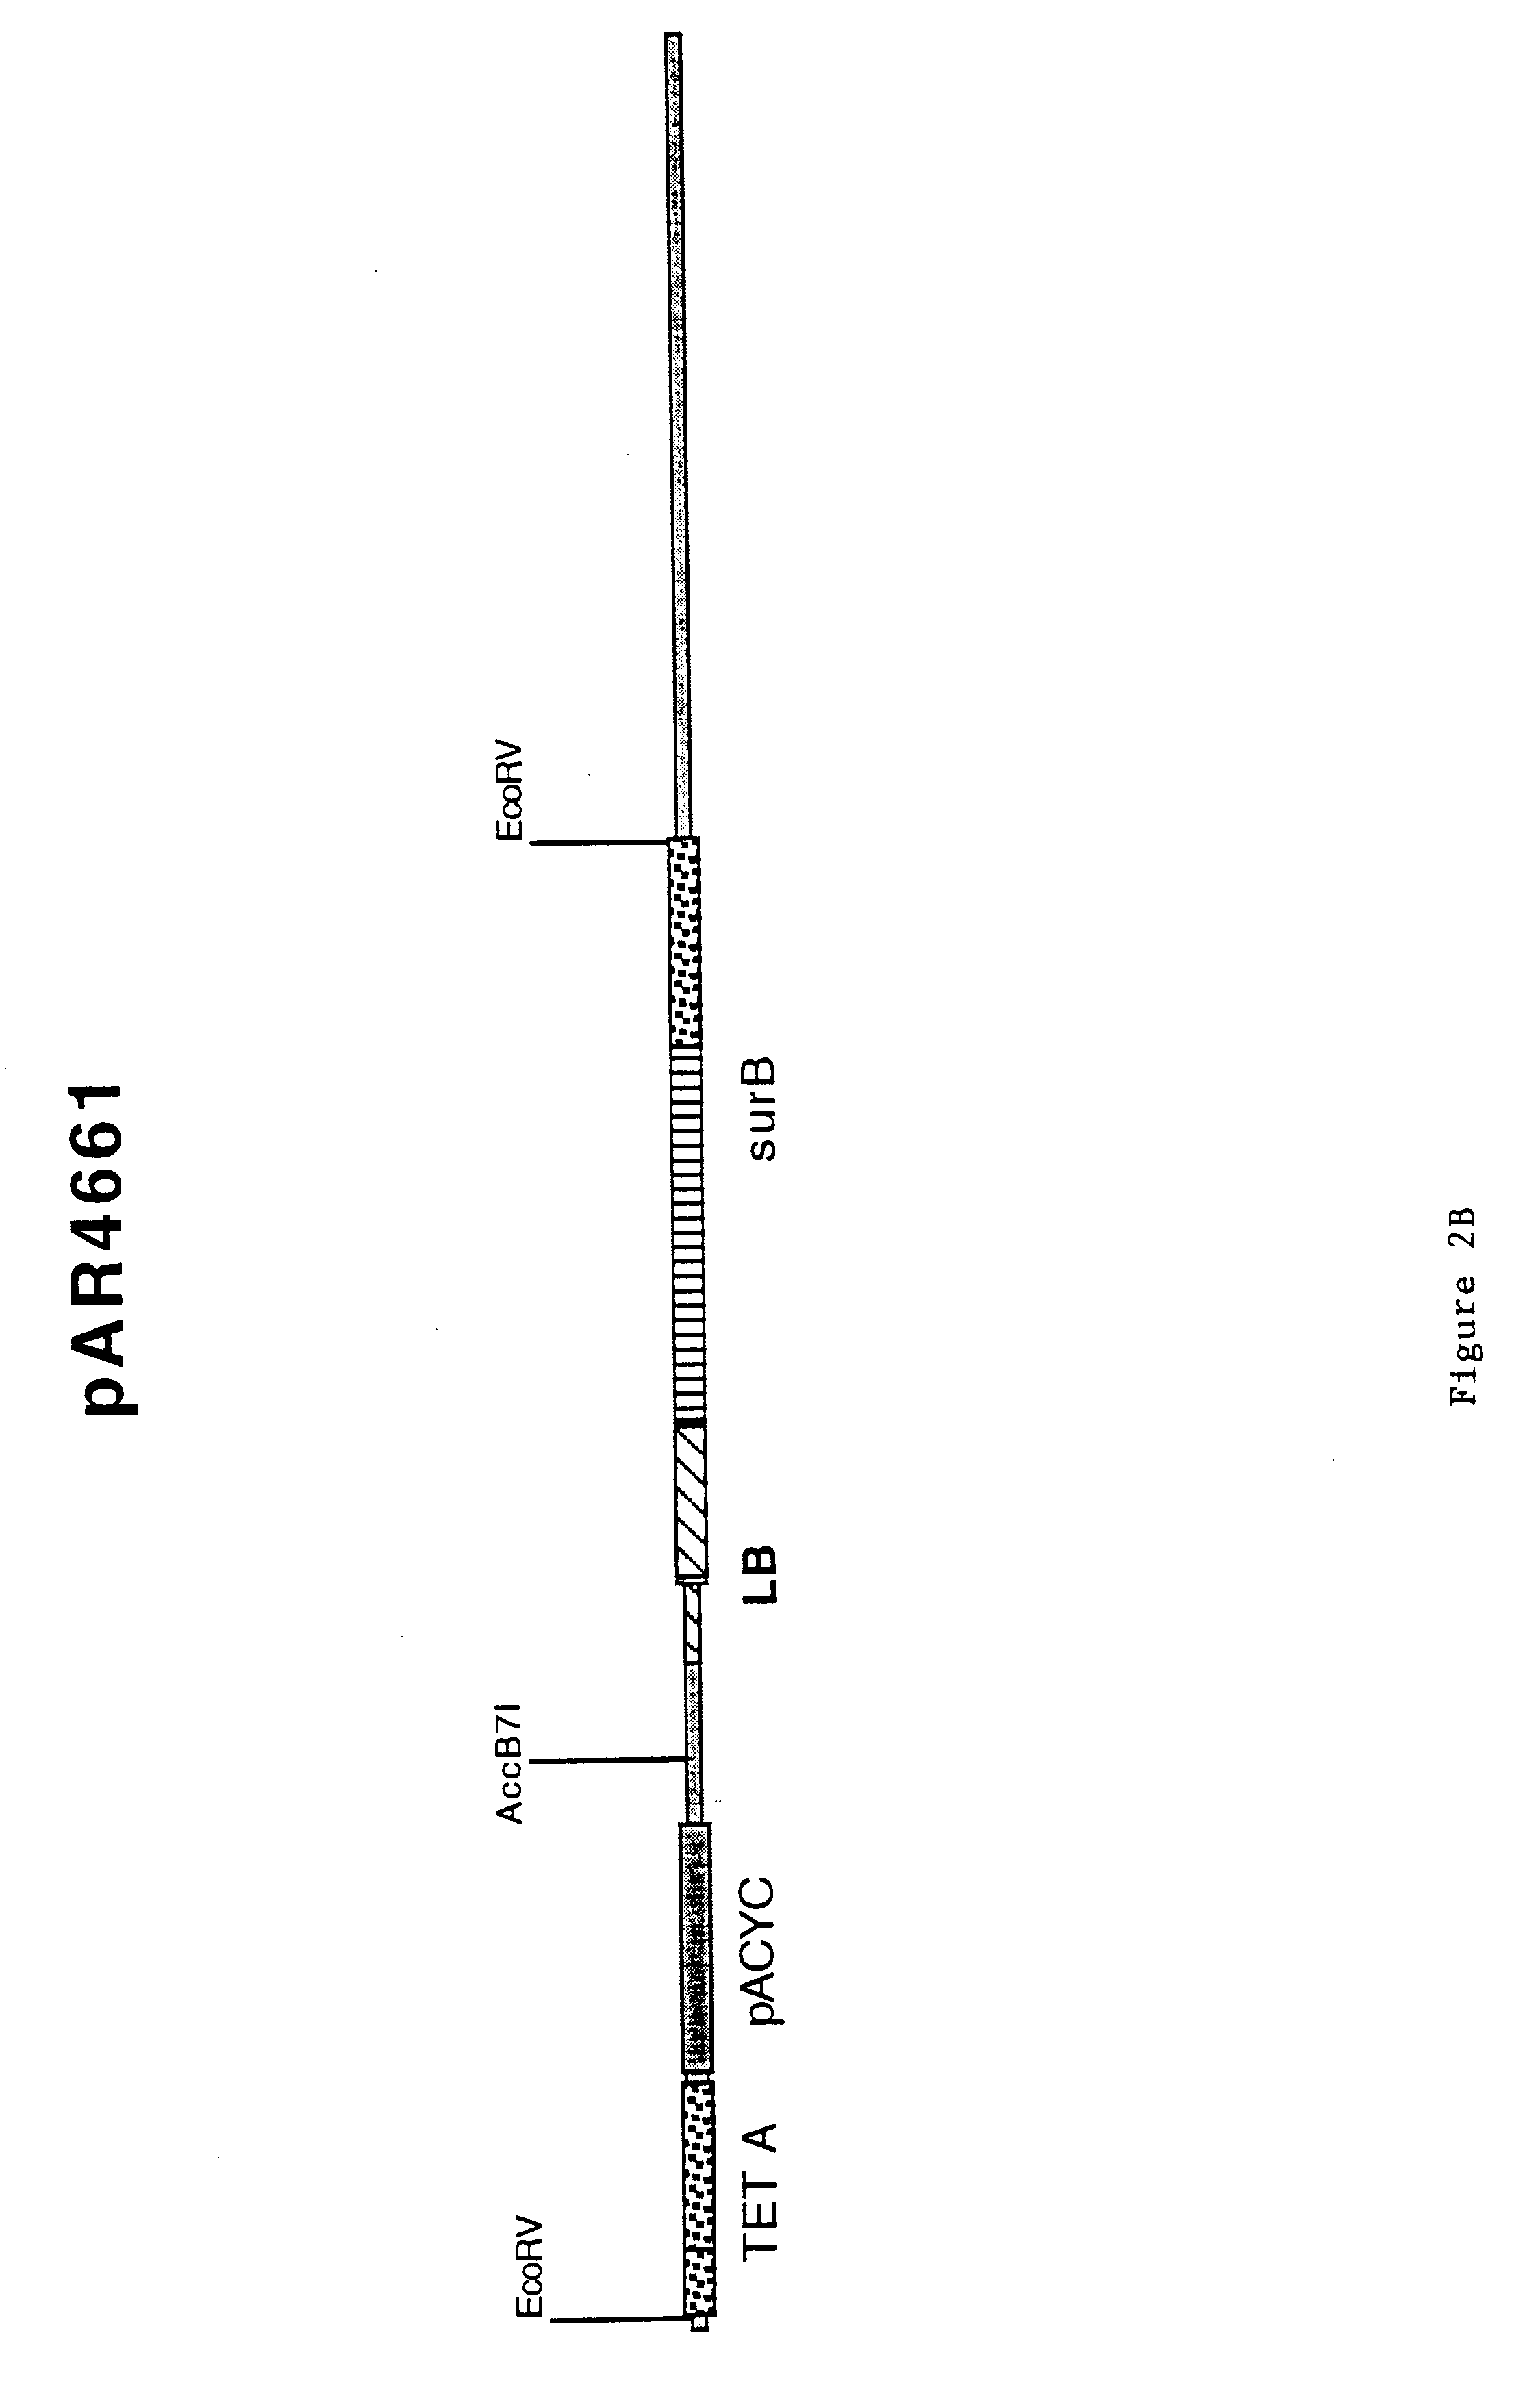 Compositions and methods for improved plant transformation